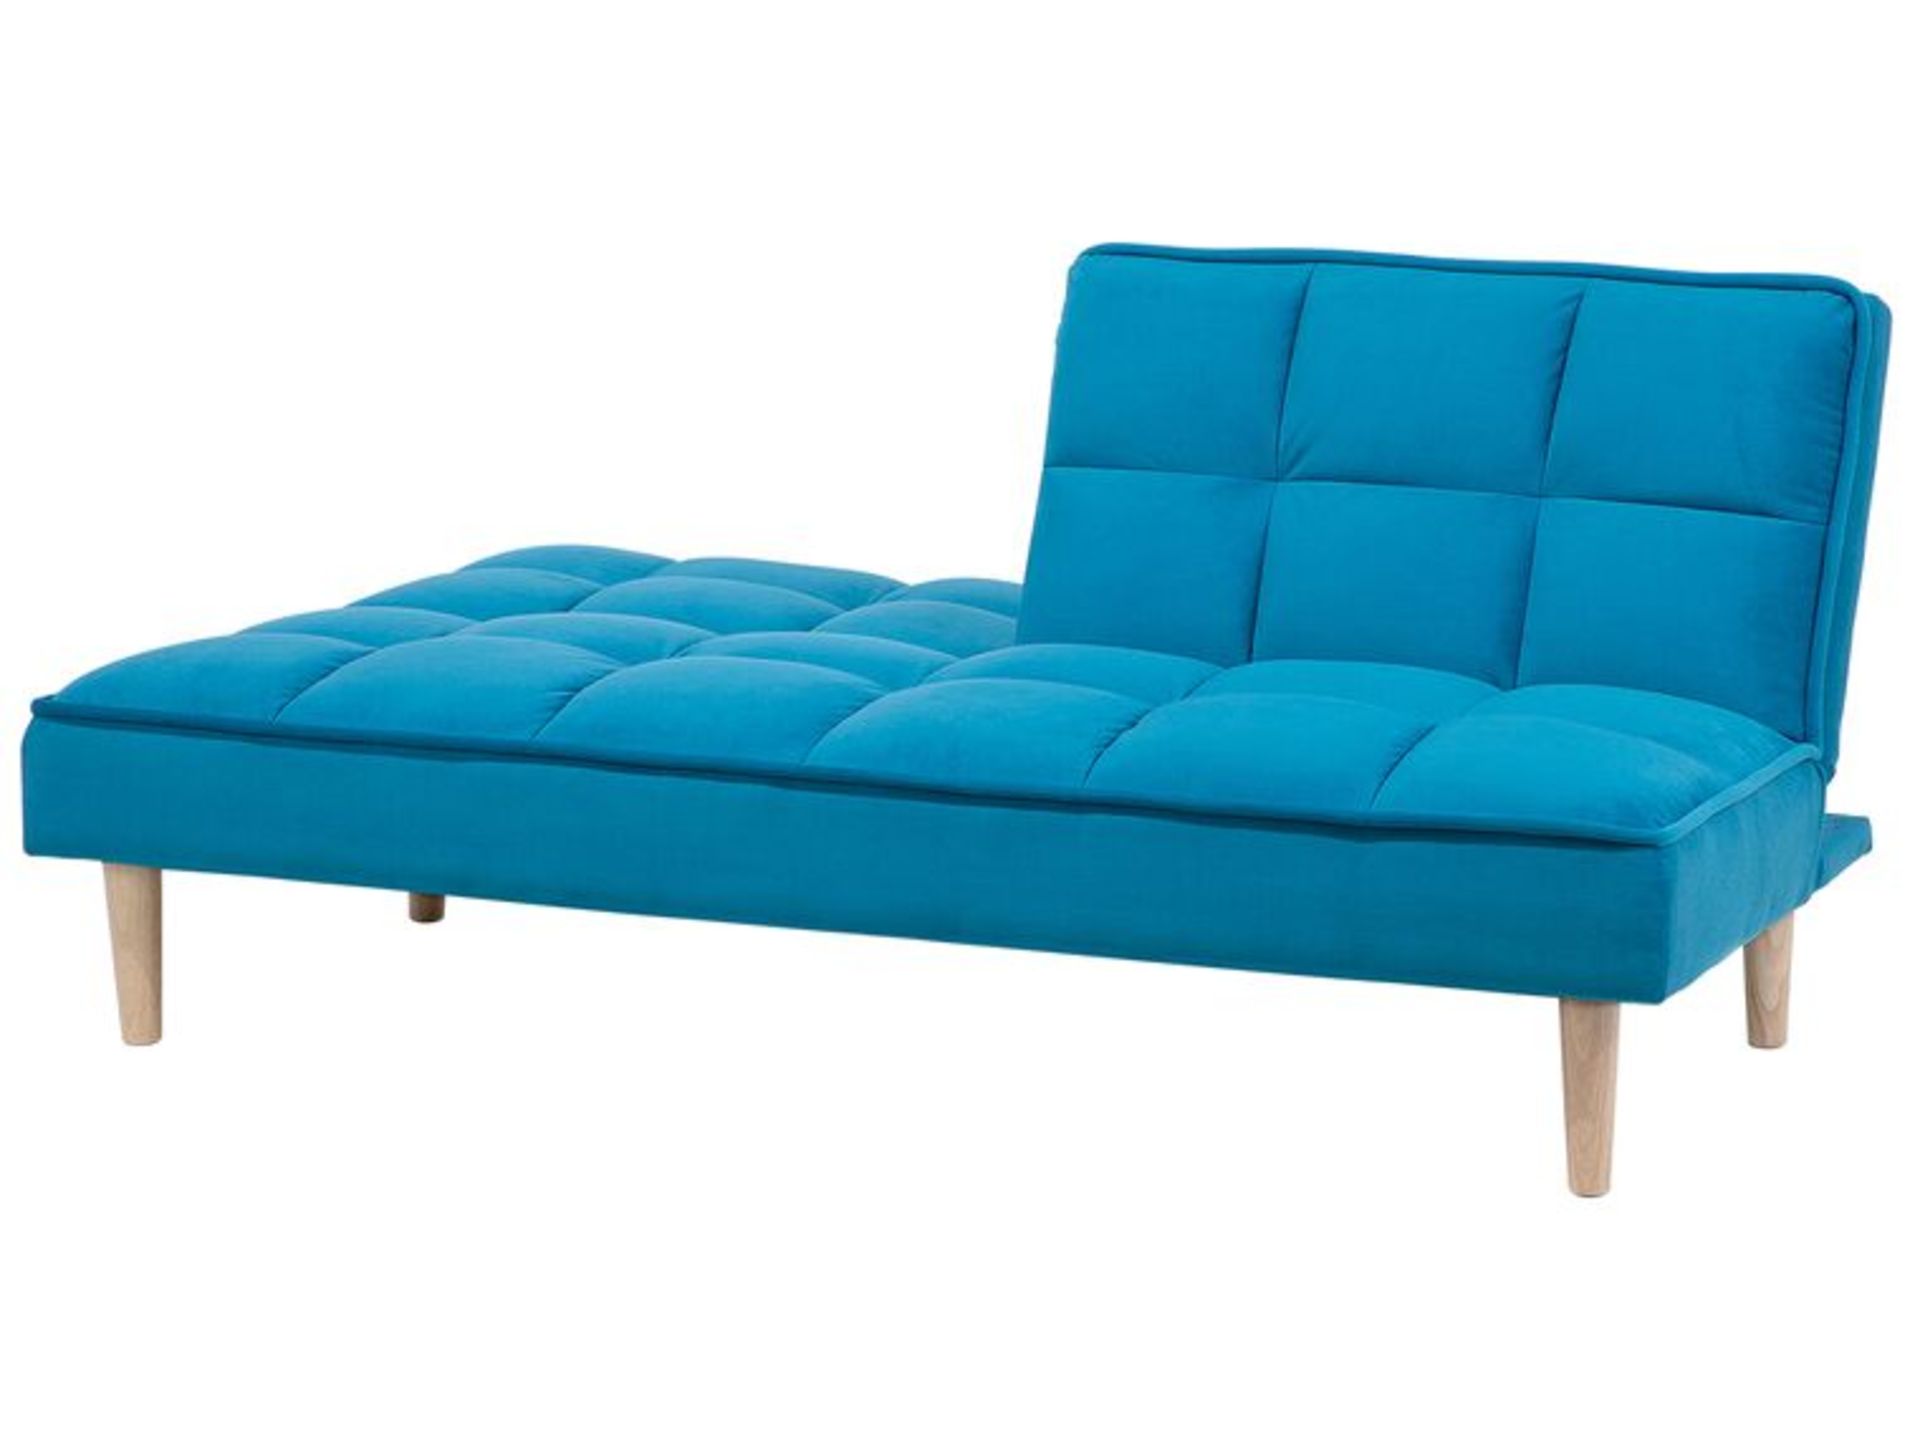 Siljan Fabric Sofa Bed Blue. - ER. Simple, clean style combined with functionality, this 3-seater - Image 2 of 2